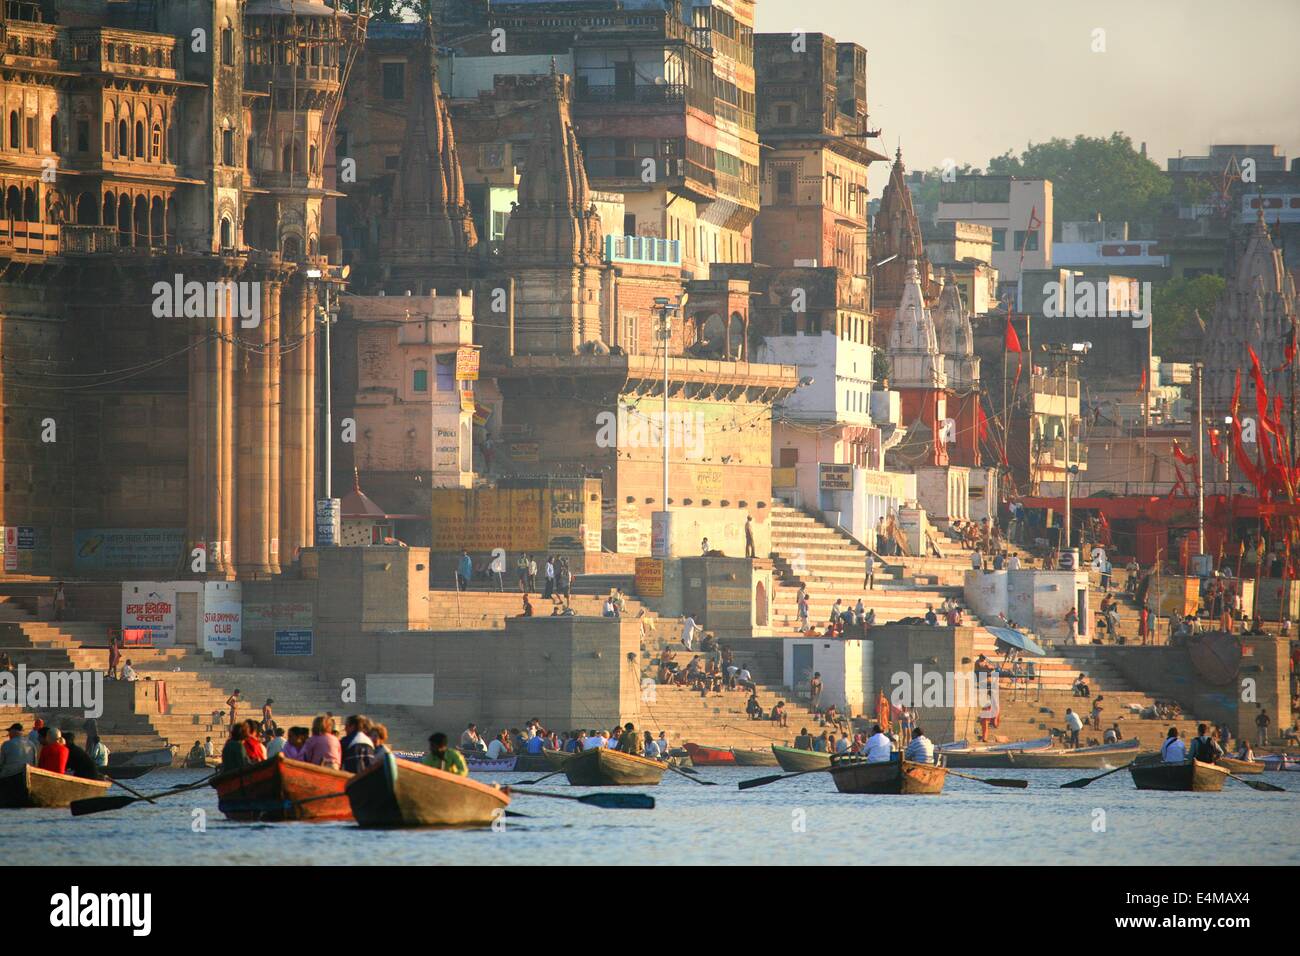 The holy city of Varanasi and the Ganges River in India Stock Photo